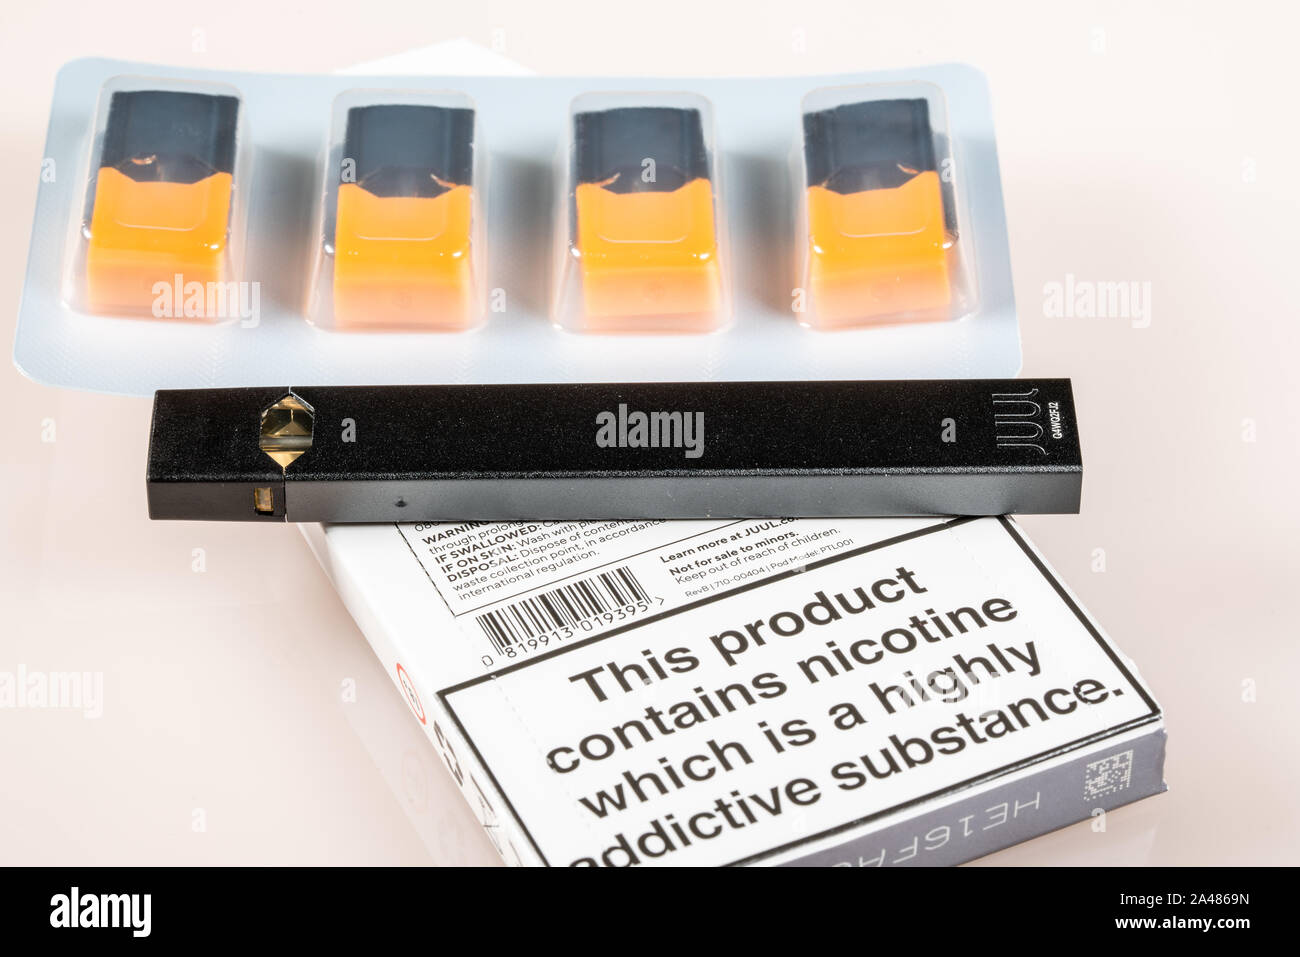 MORGANTOWN, WV - 12 October 2109: Warning sign for Juul e-cigarette or nicotine vapor dispenser box on and flavored JUULpods on light background Stock Photo